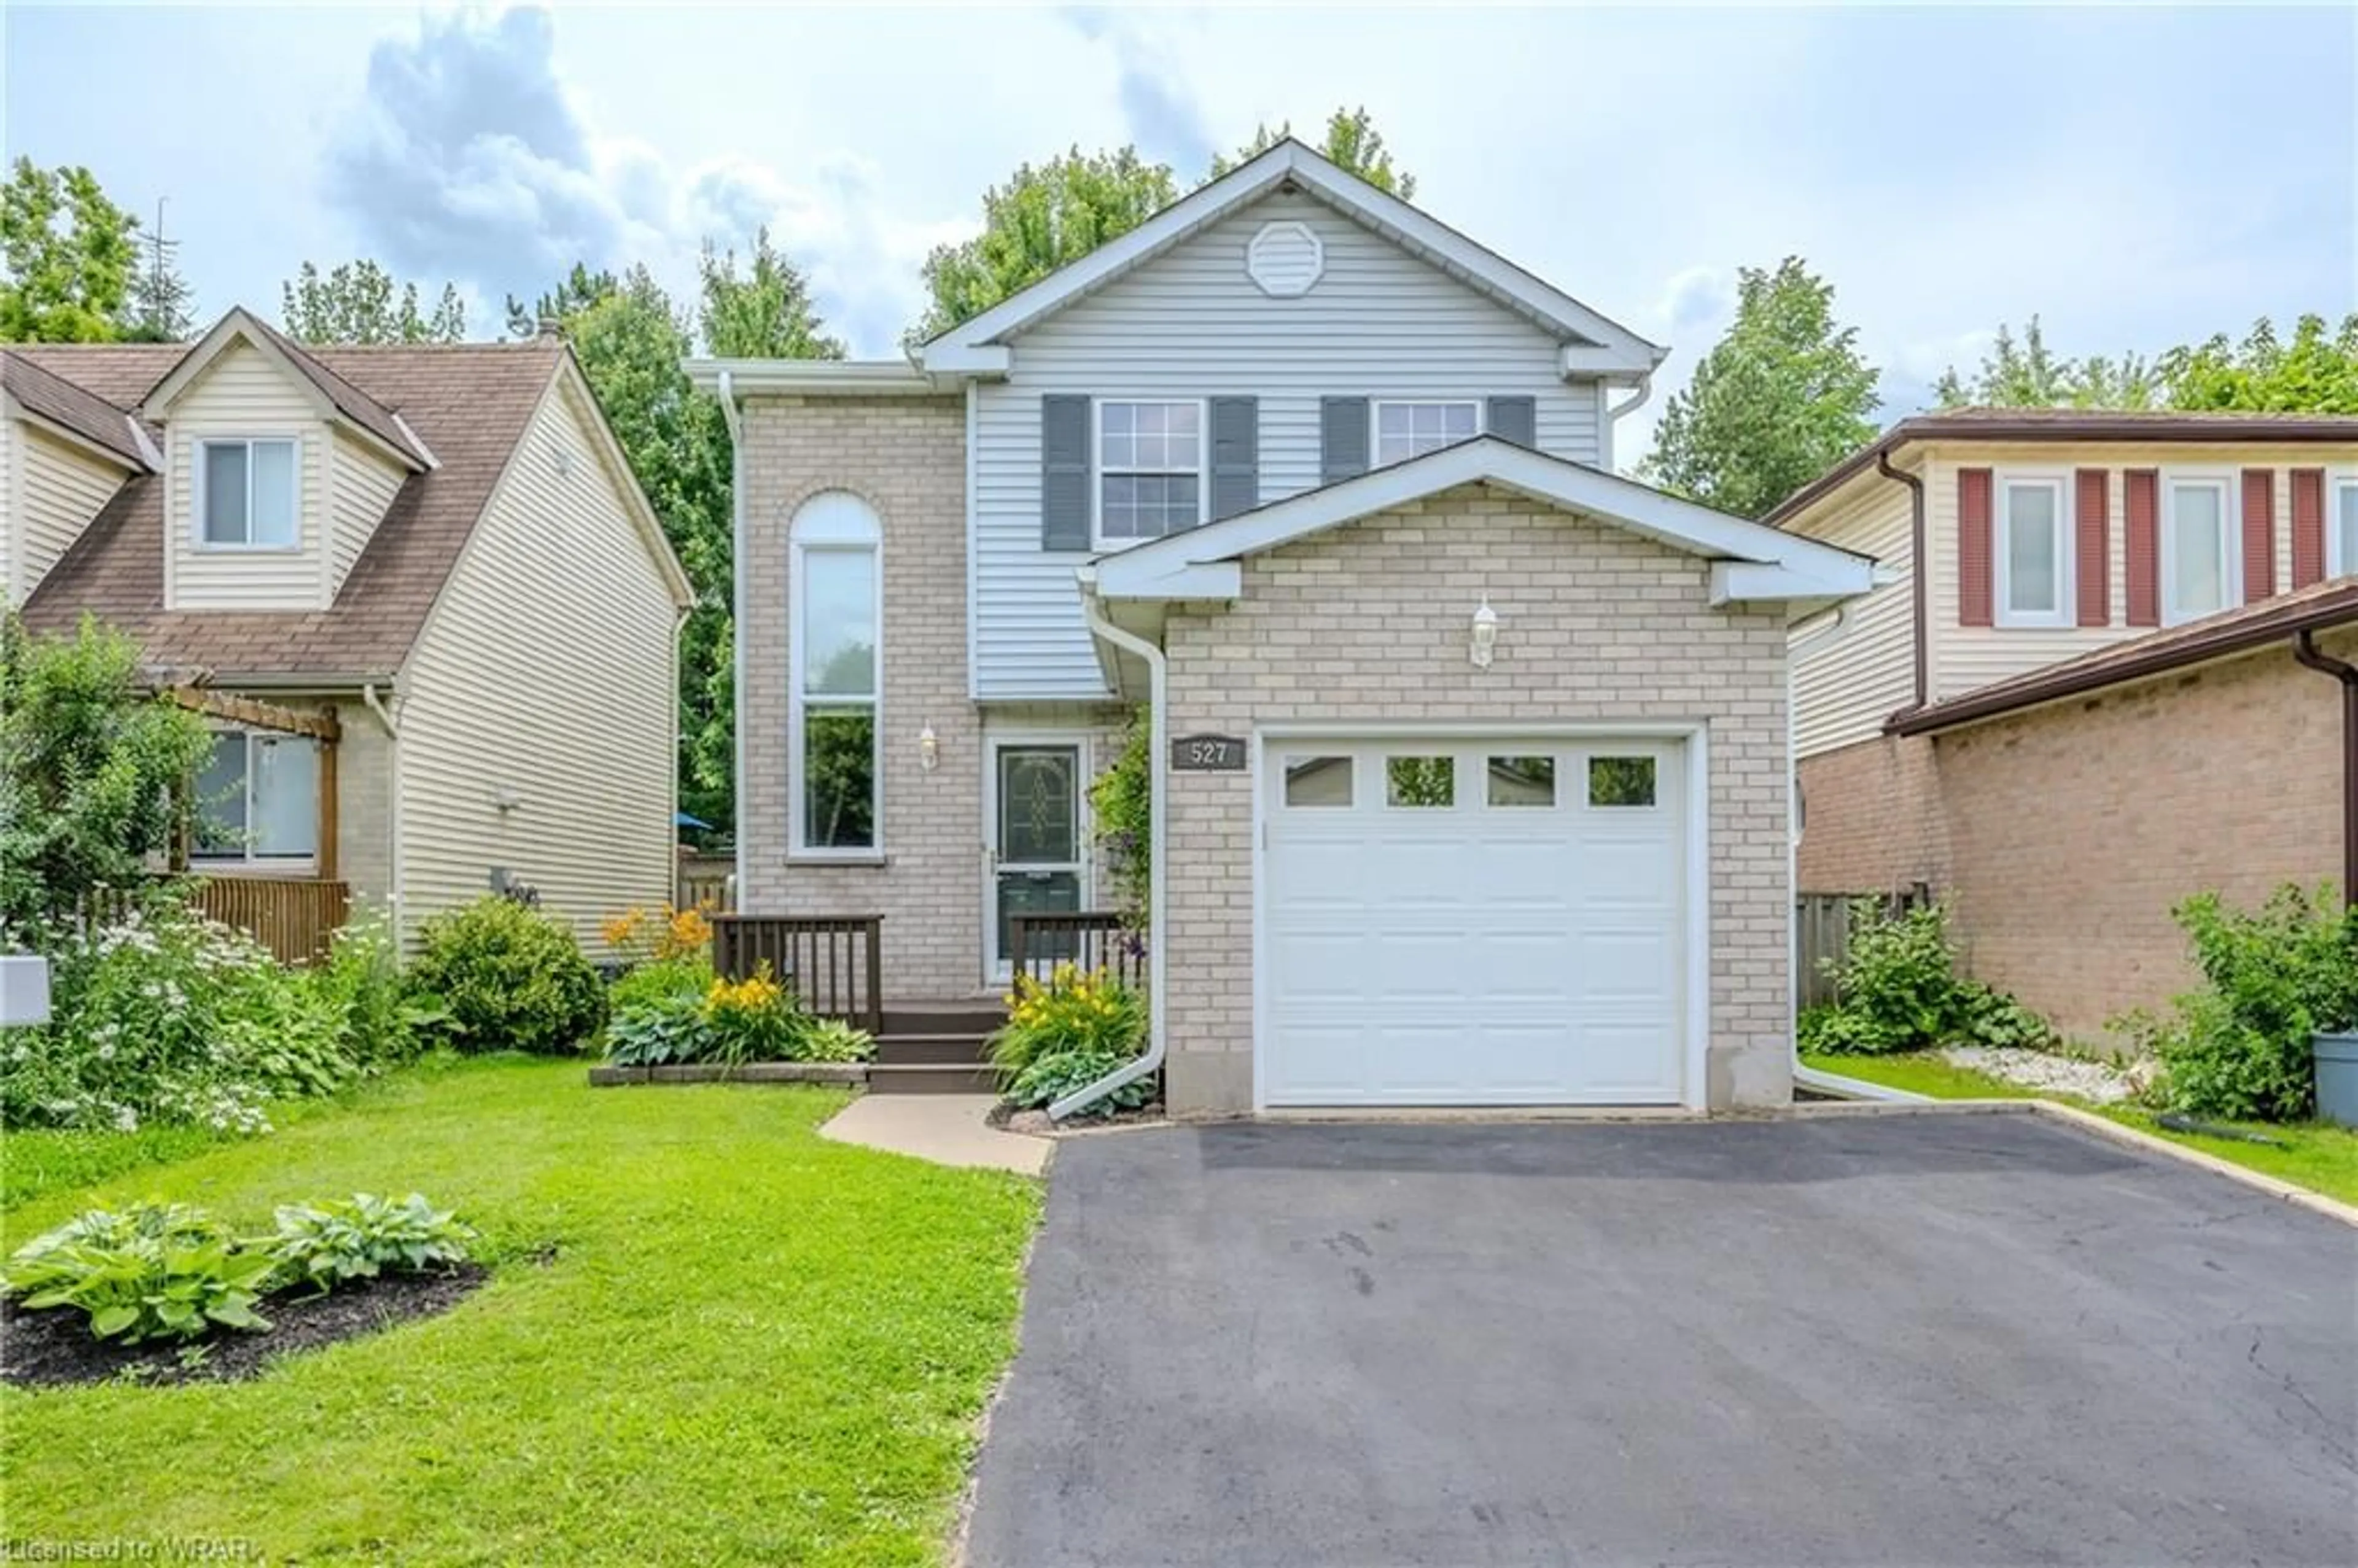 Frontside or backside of a home for 527 Drummerhill Cres, Waterloo Ontario N2T 1G3